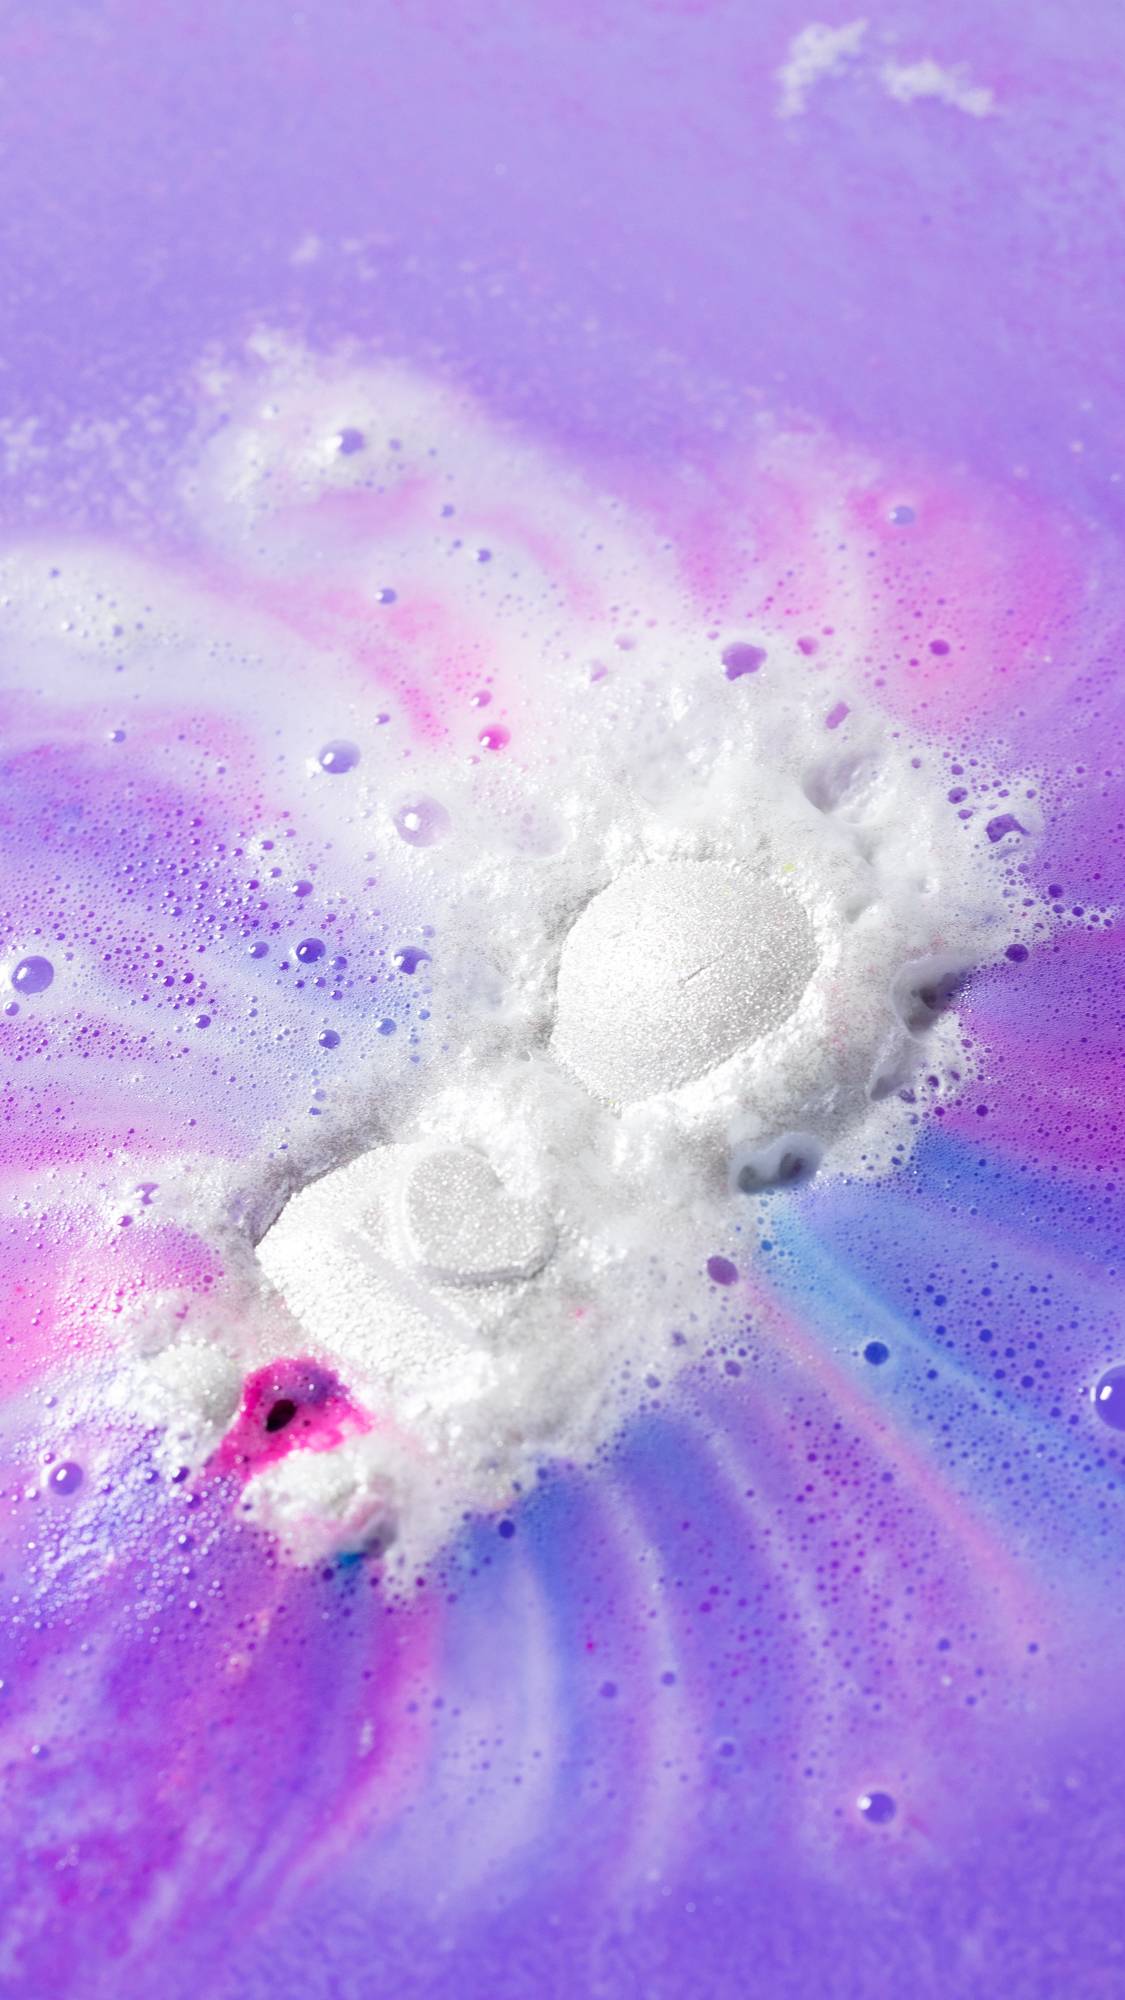 The bath bomb sits slightly sinking in the bath surrounded by shimmering swirls of pink, purple and blue.